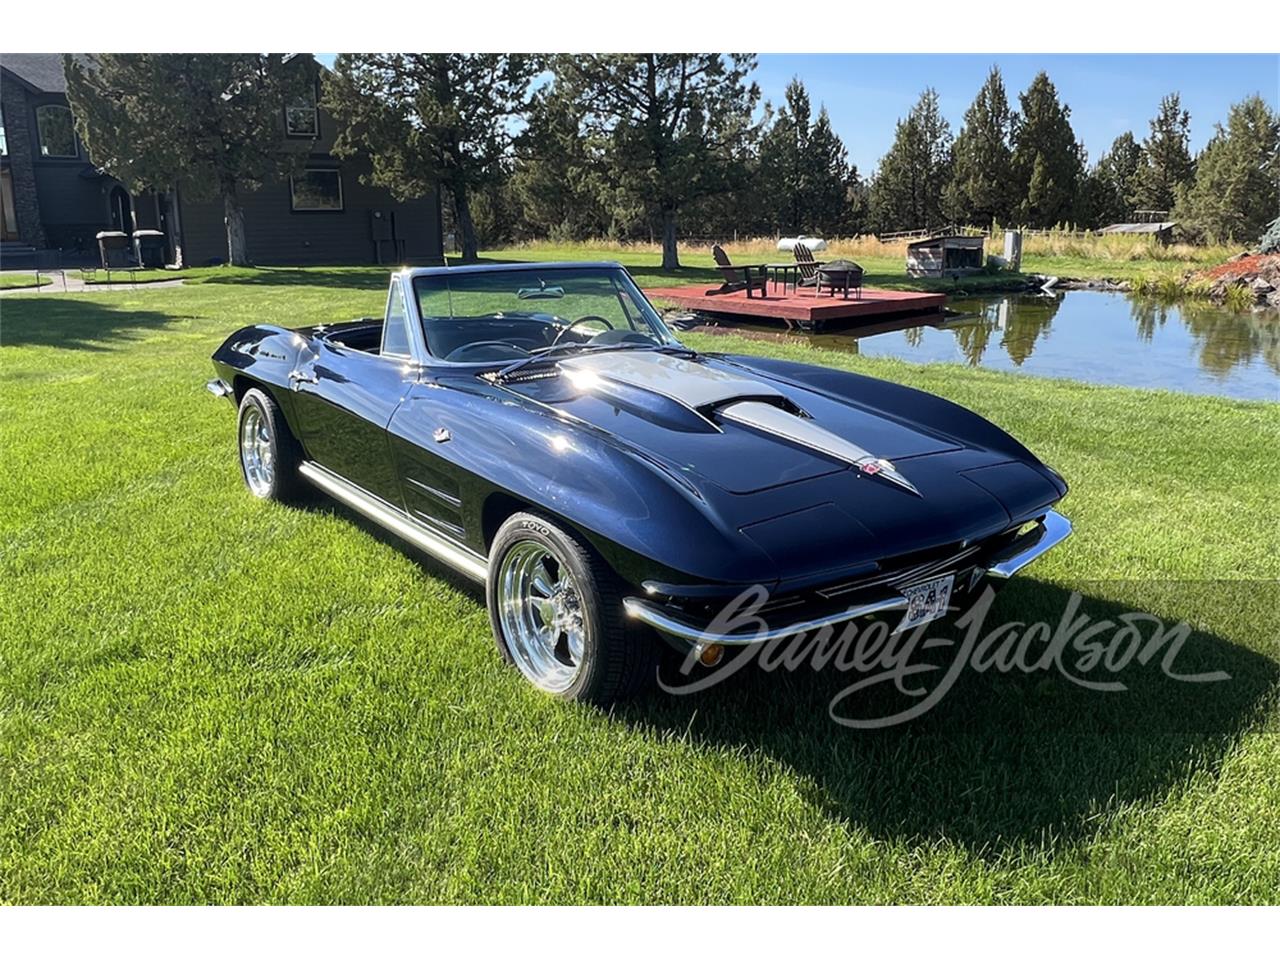 For Sale at Auction: 1964 Chevrolet Corvette in Scottsdale, Arizona for sale in Scottsdale, AZ